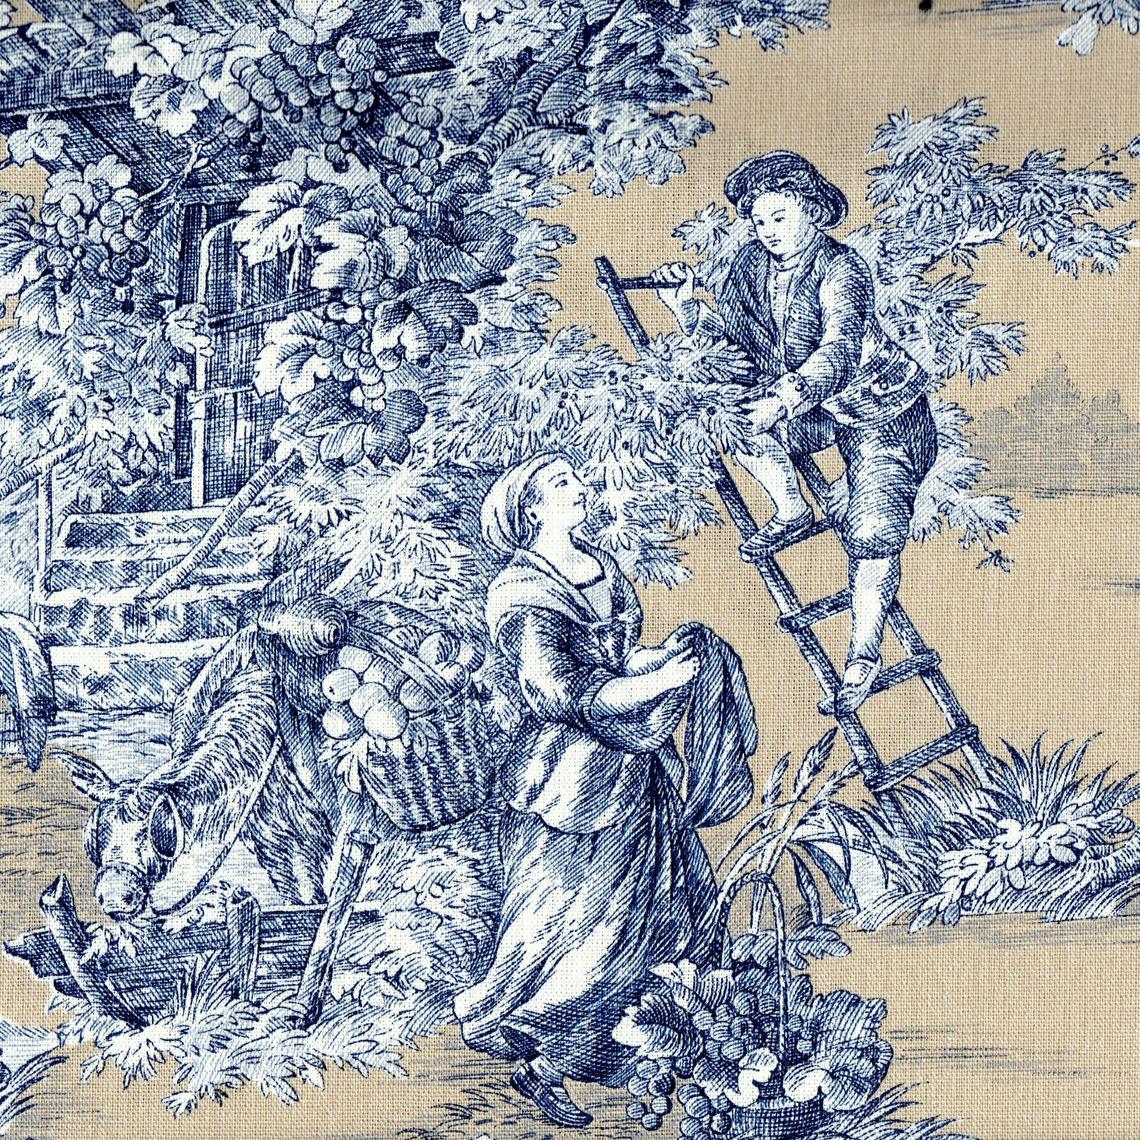 tab top curtain panels pair in pastorale #88 blue on beige french country toile